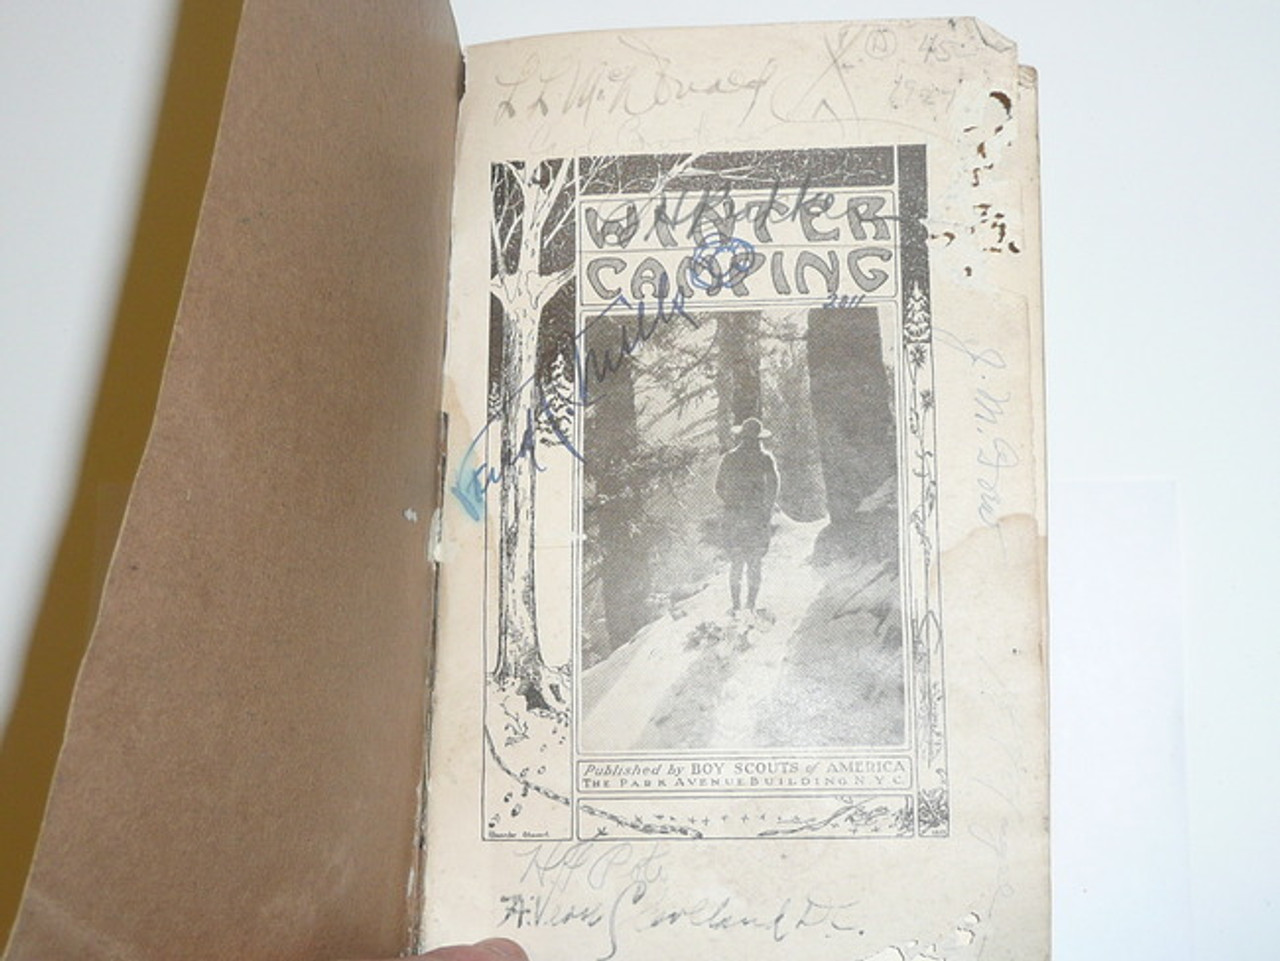 1927 Winter Camping Handbook, Limited Edition, Signed By Key Scouting Executives